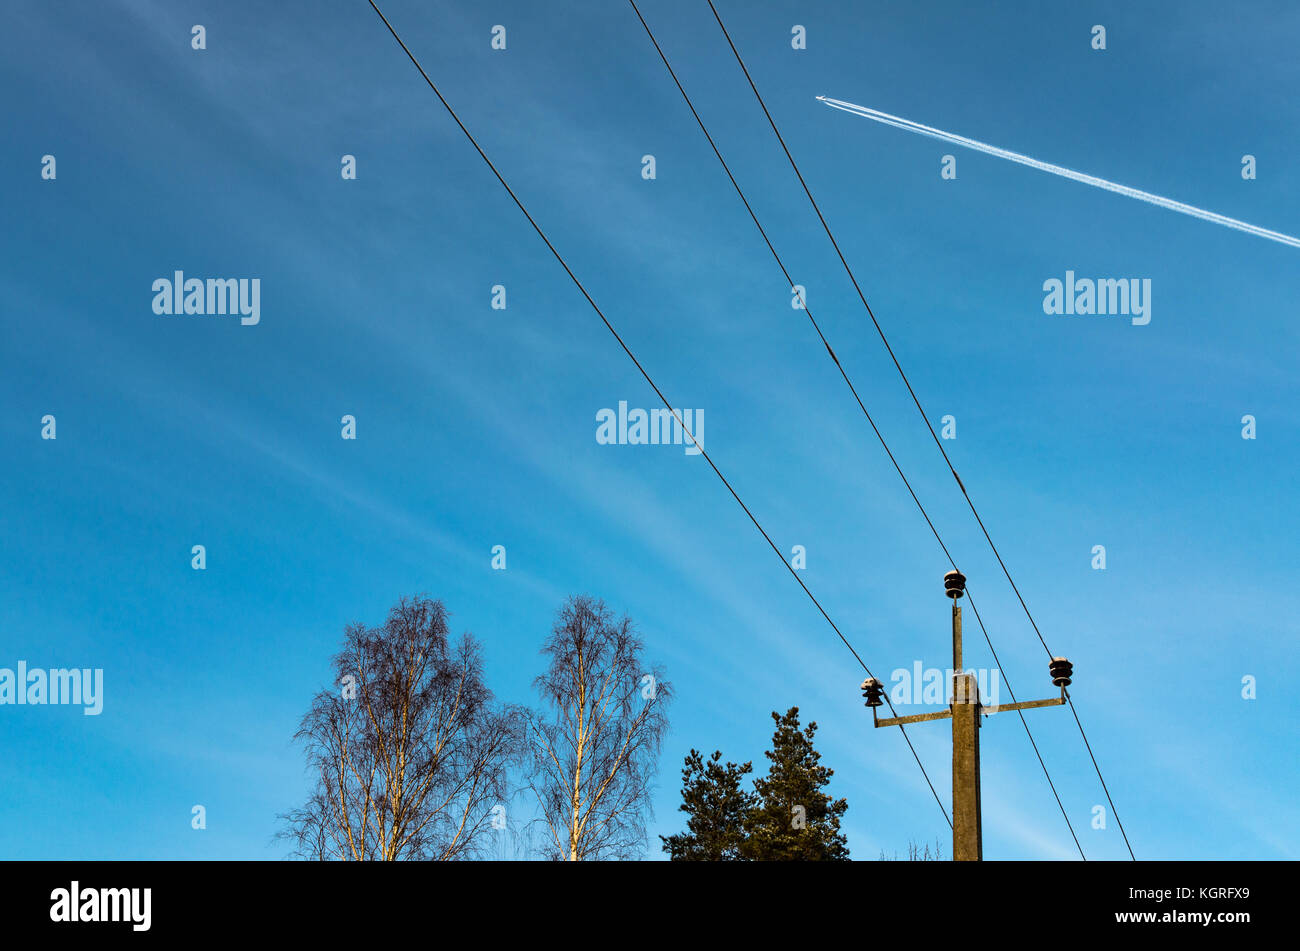 A plane in high flight and vapour trails above telephone lines Stock Photo